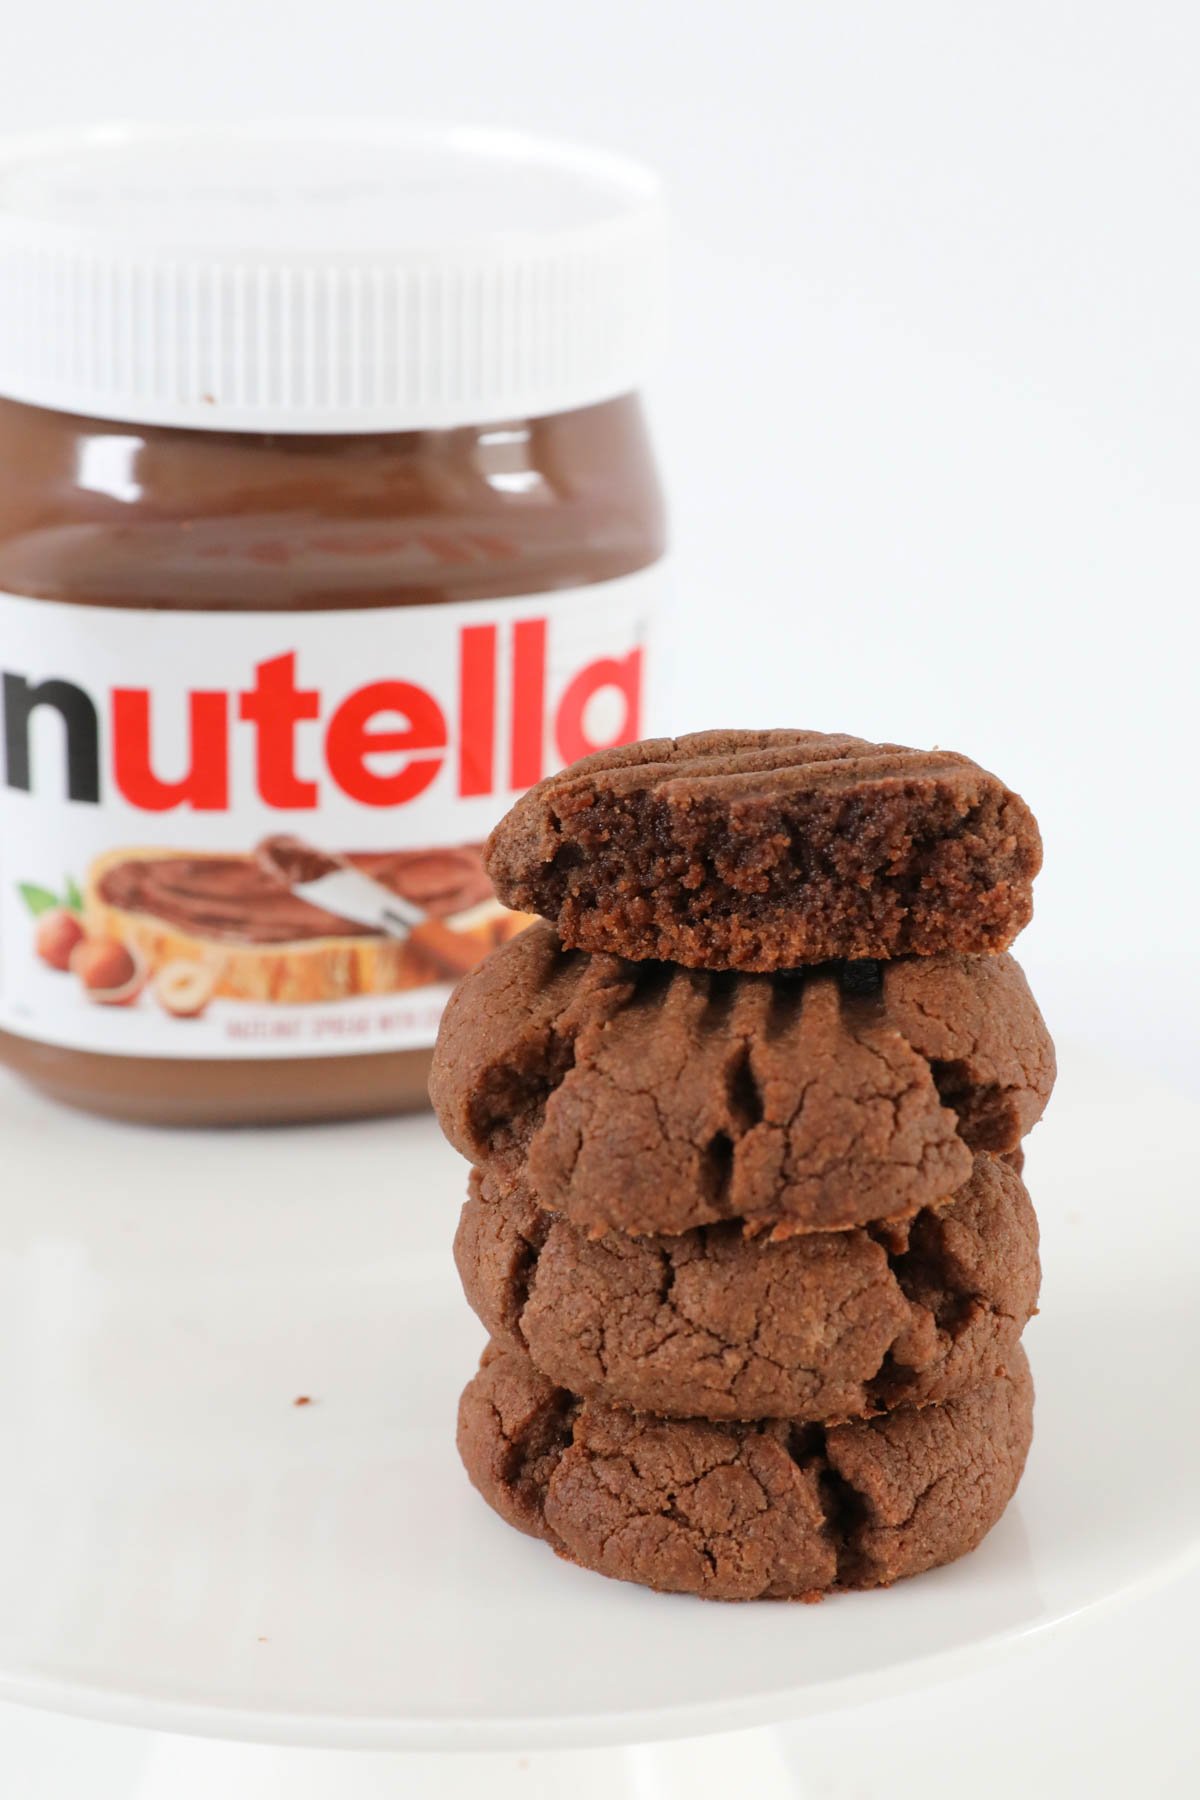 A stack of chocolate cookies next to a jar of Nutella.